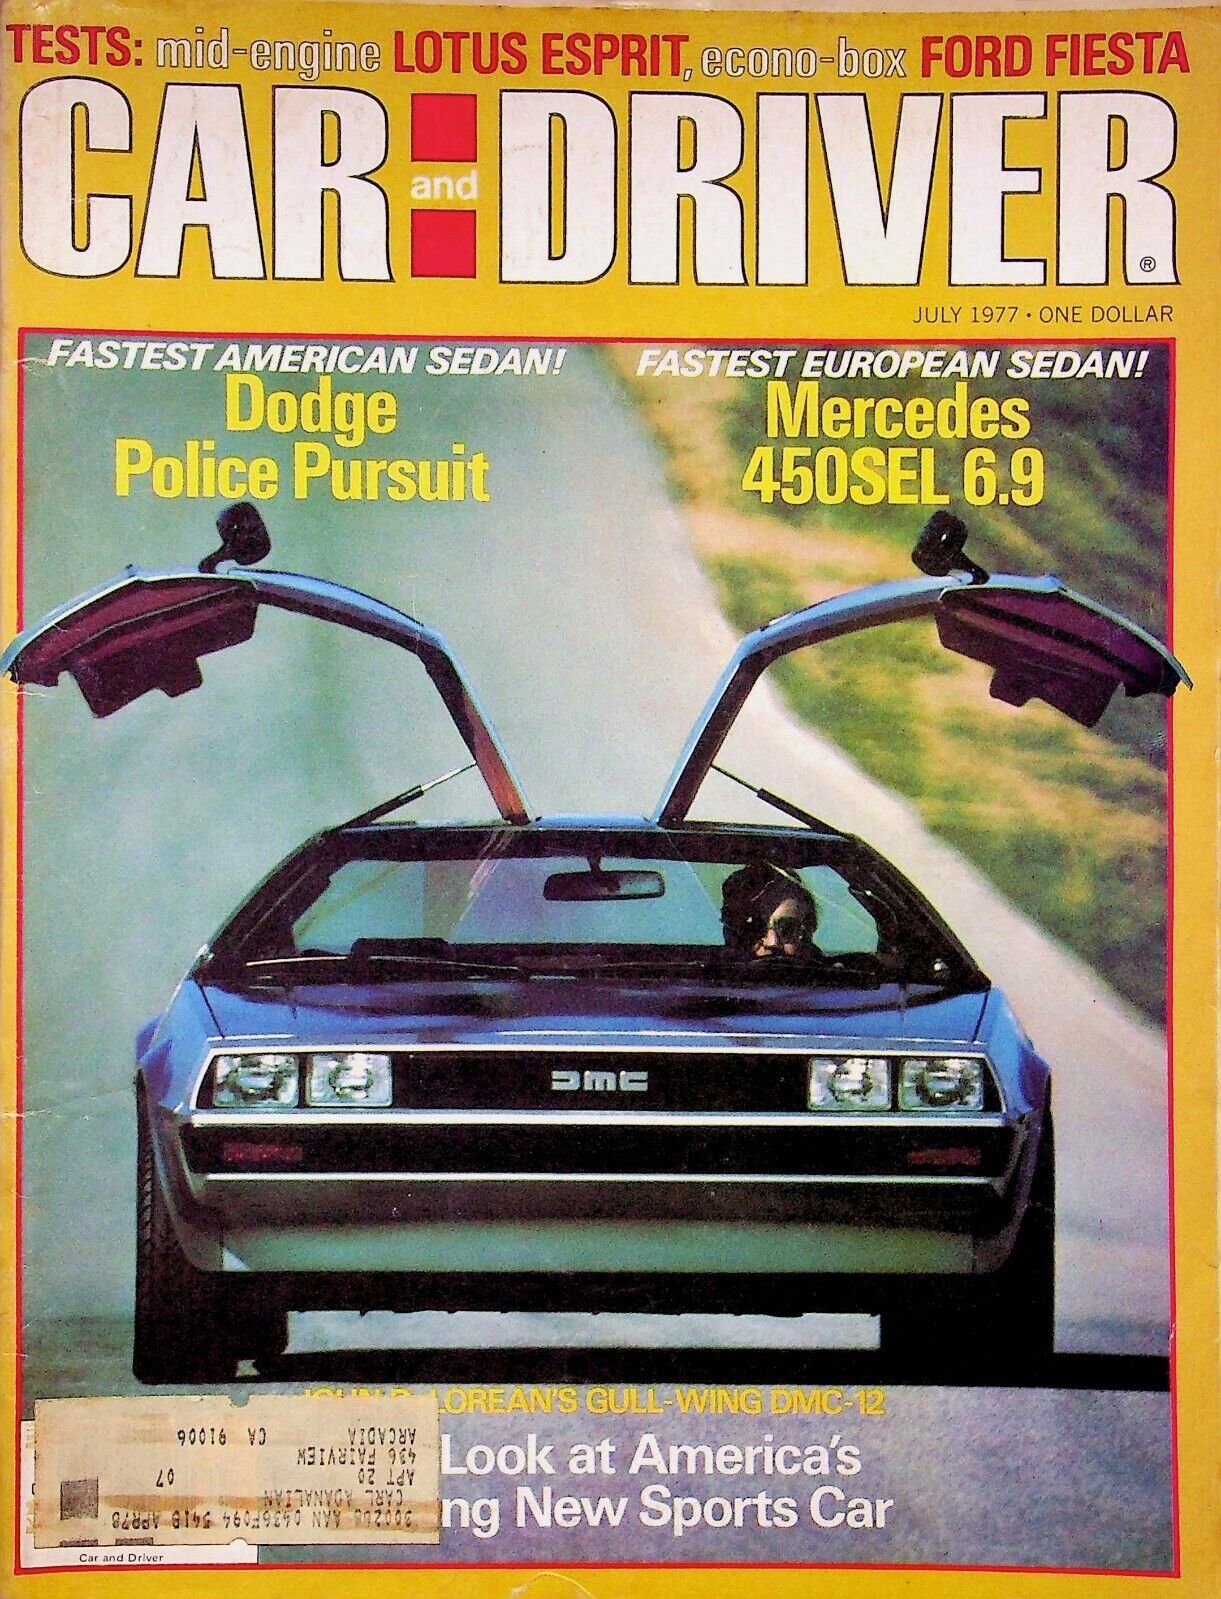 SPECIAL SECTION: DeLOREAN'S DREAM MACHINE - CAR AND DRIVER MAGAZINE GOOD USED 